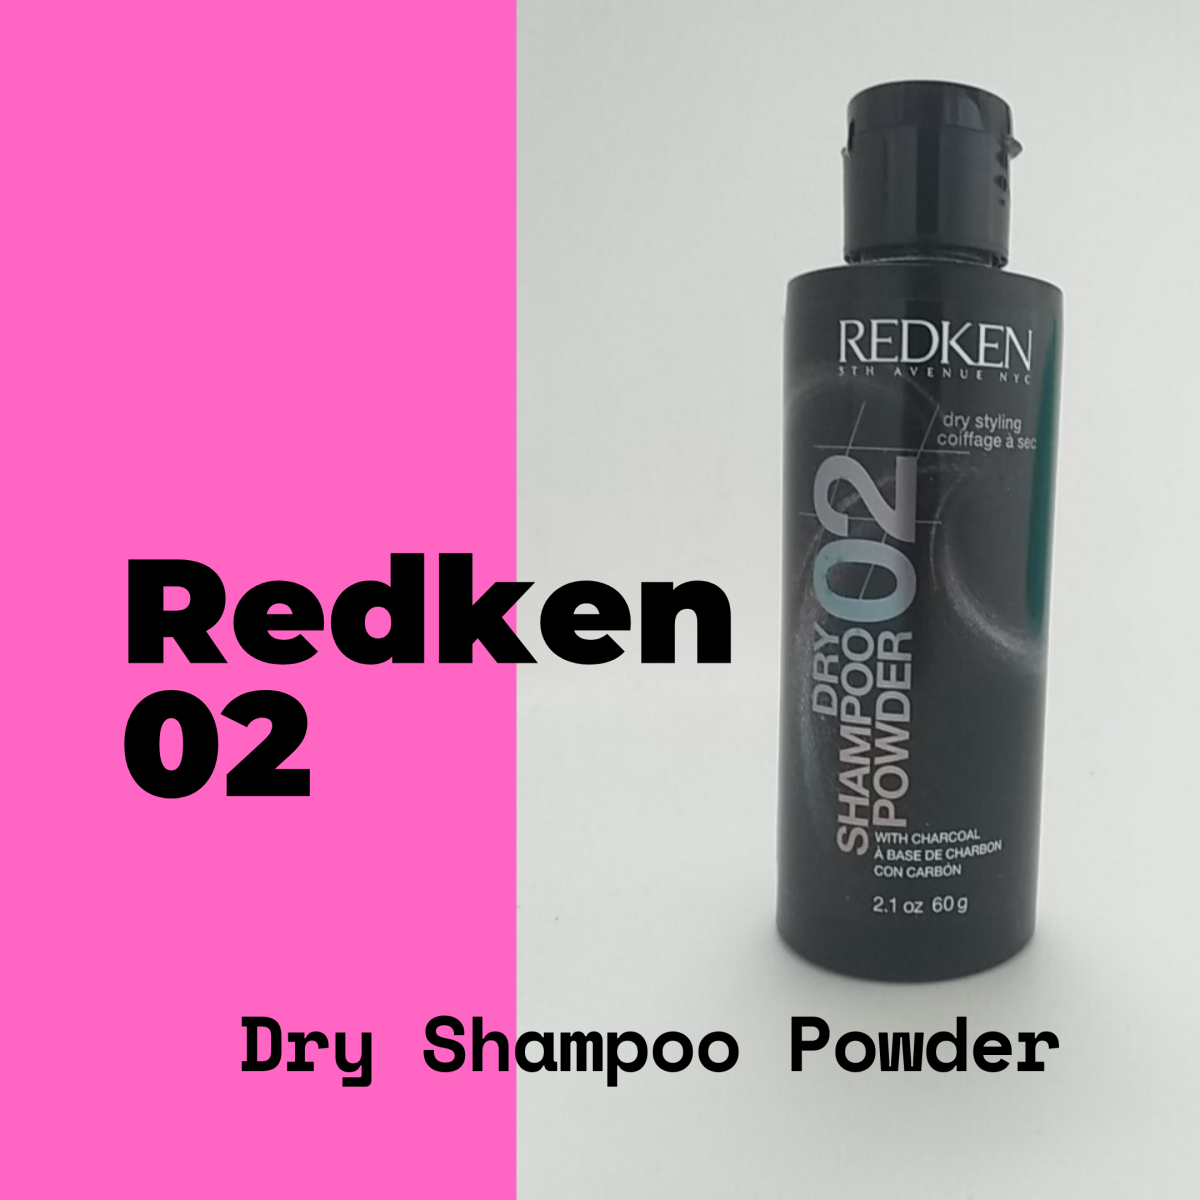 Redken O2 dry shampoo is suitable for fine hair and absorbs excess oil.